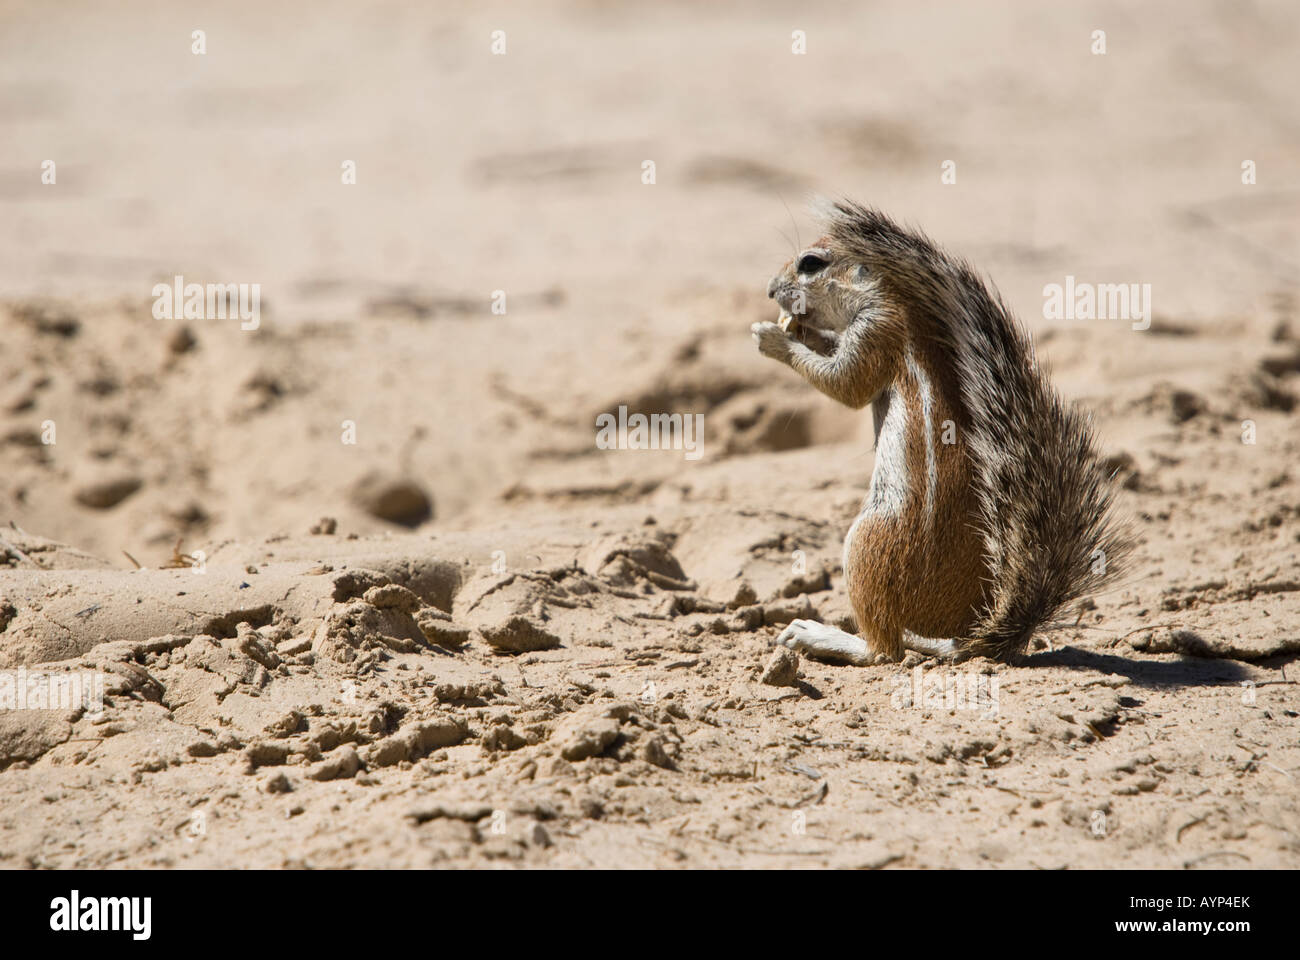 A ground squirrel foraging for food in the Kalahari semi-desert Stock Photo